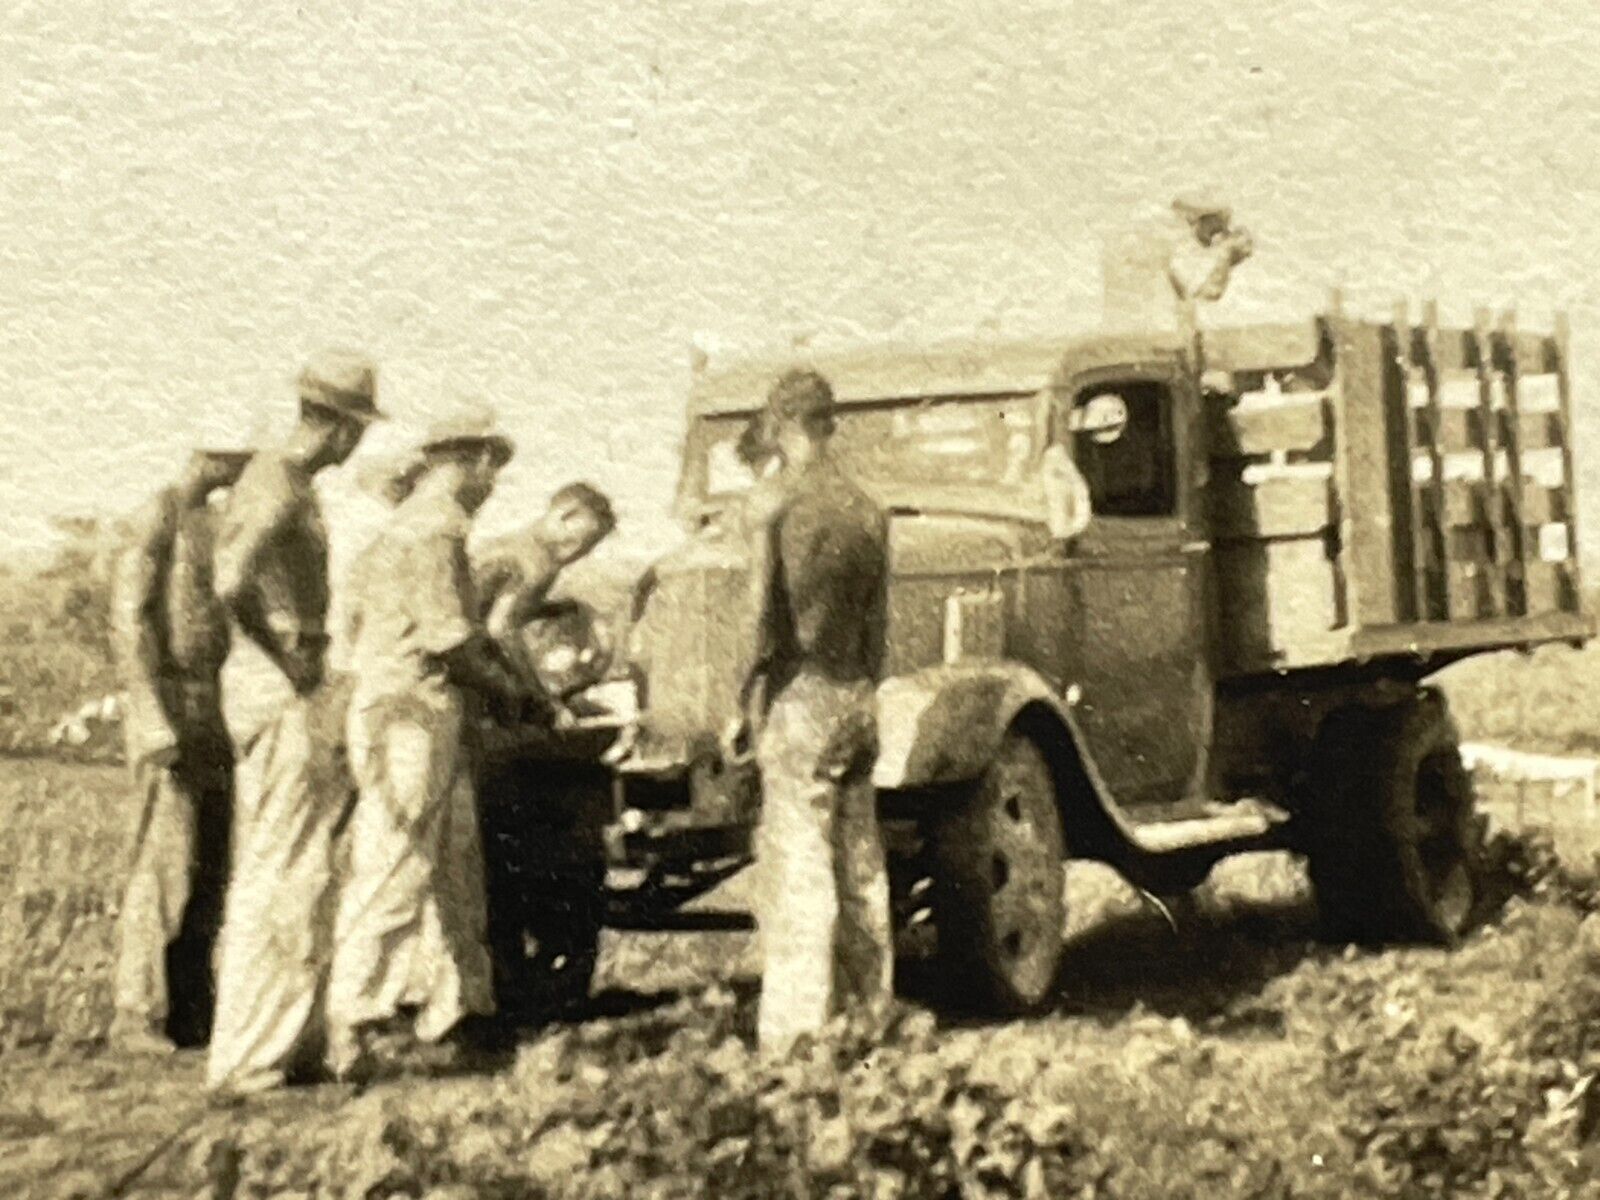 W7 Photograph Handsome Men Working On Old Truck In Field Shirtless Worker 1930\'s